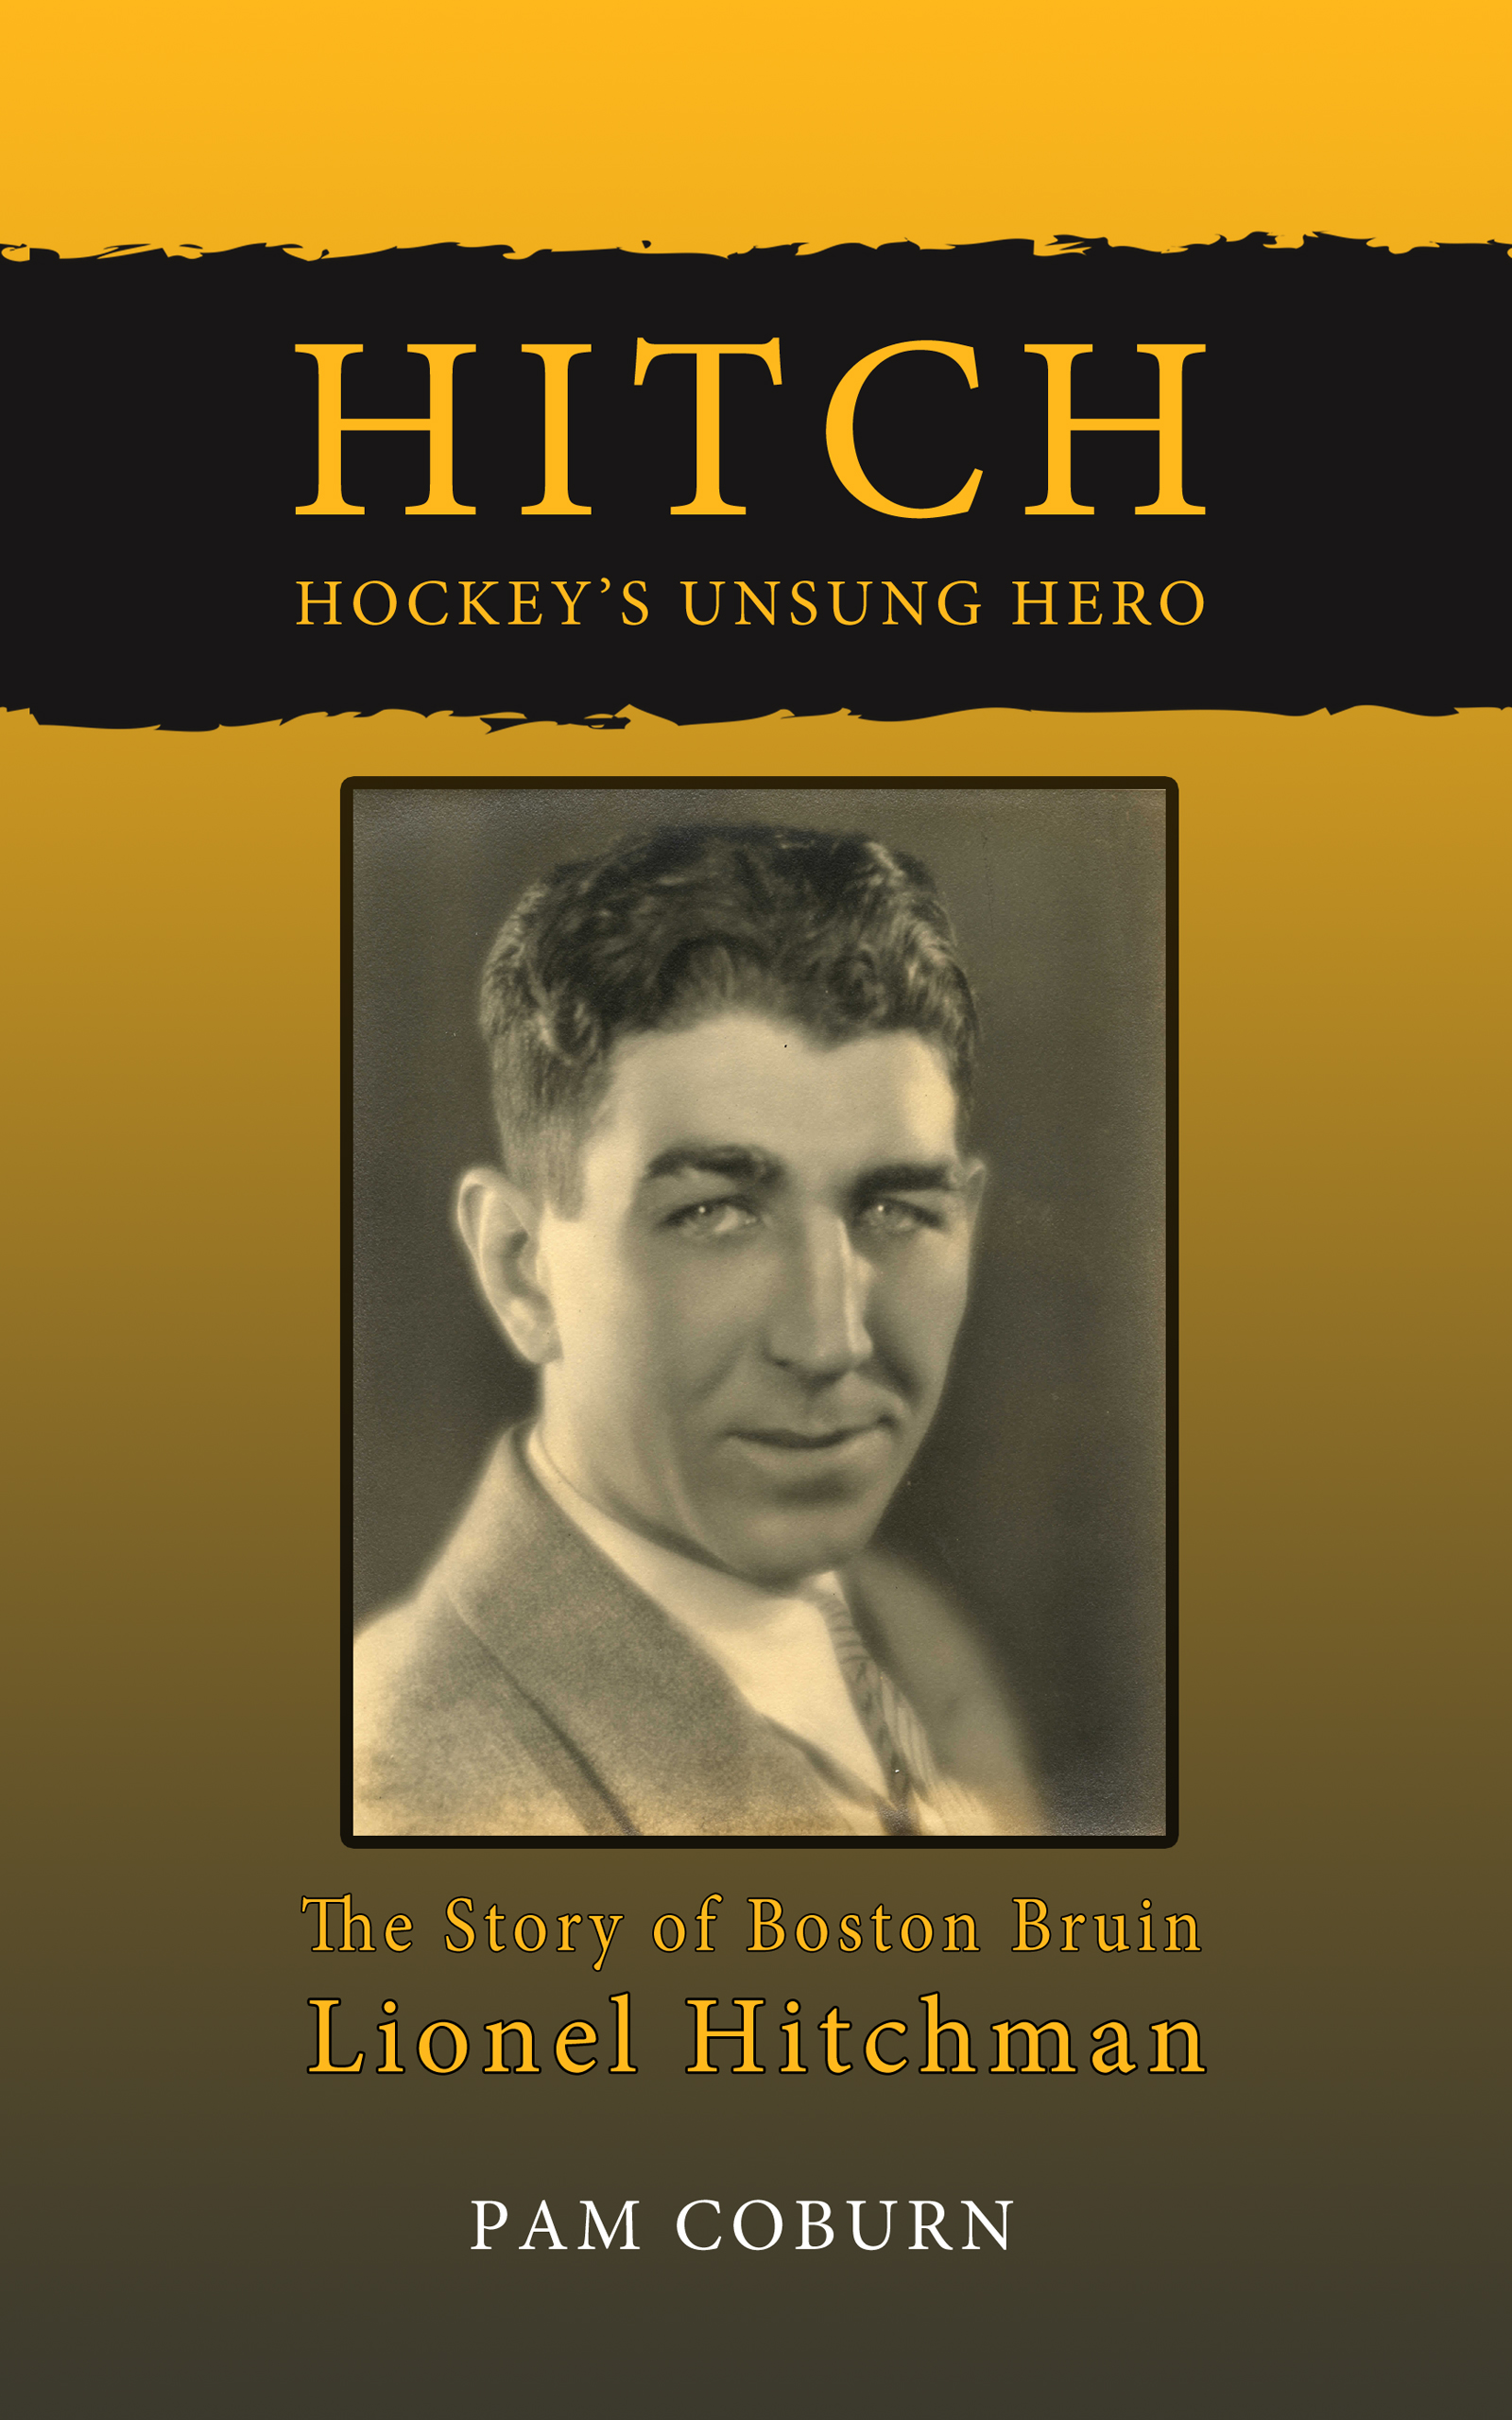 Hitch, Hockey's Unsung Hero: The Story of Boston Bruin Lionel Hitchman